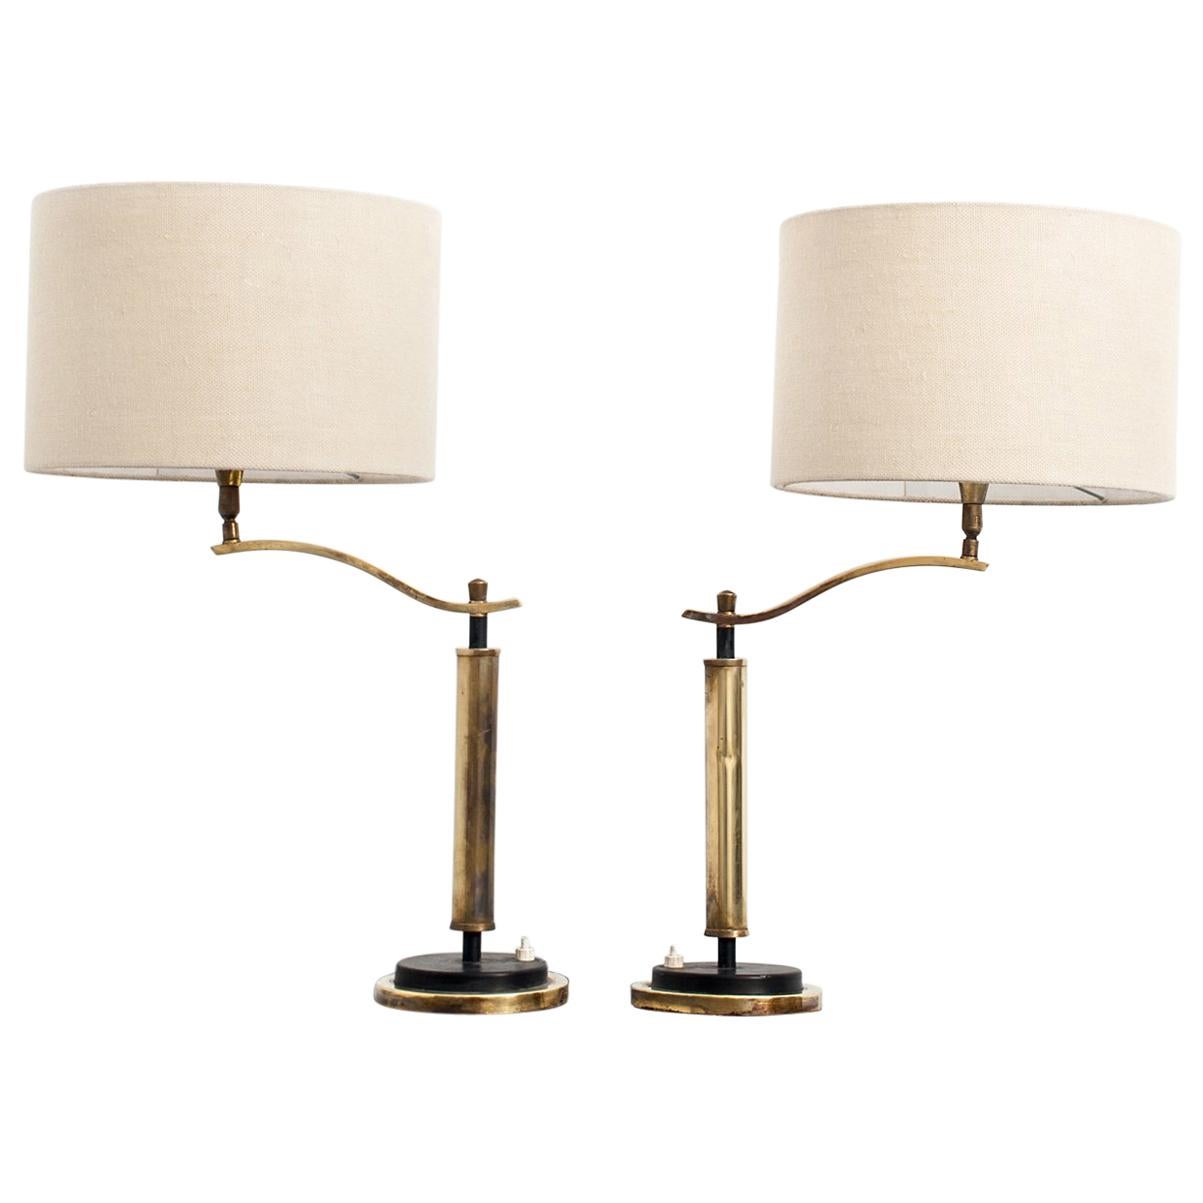 20th Century Pair of Deco Table Lamps